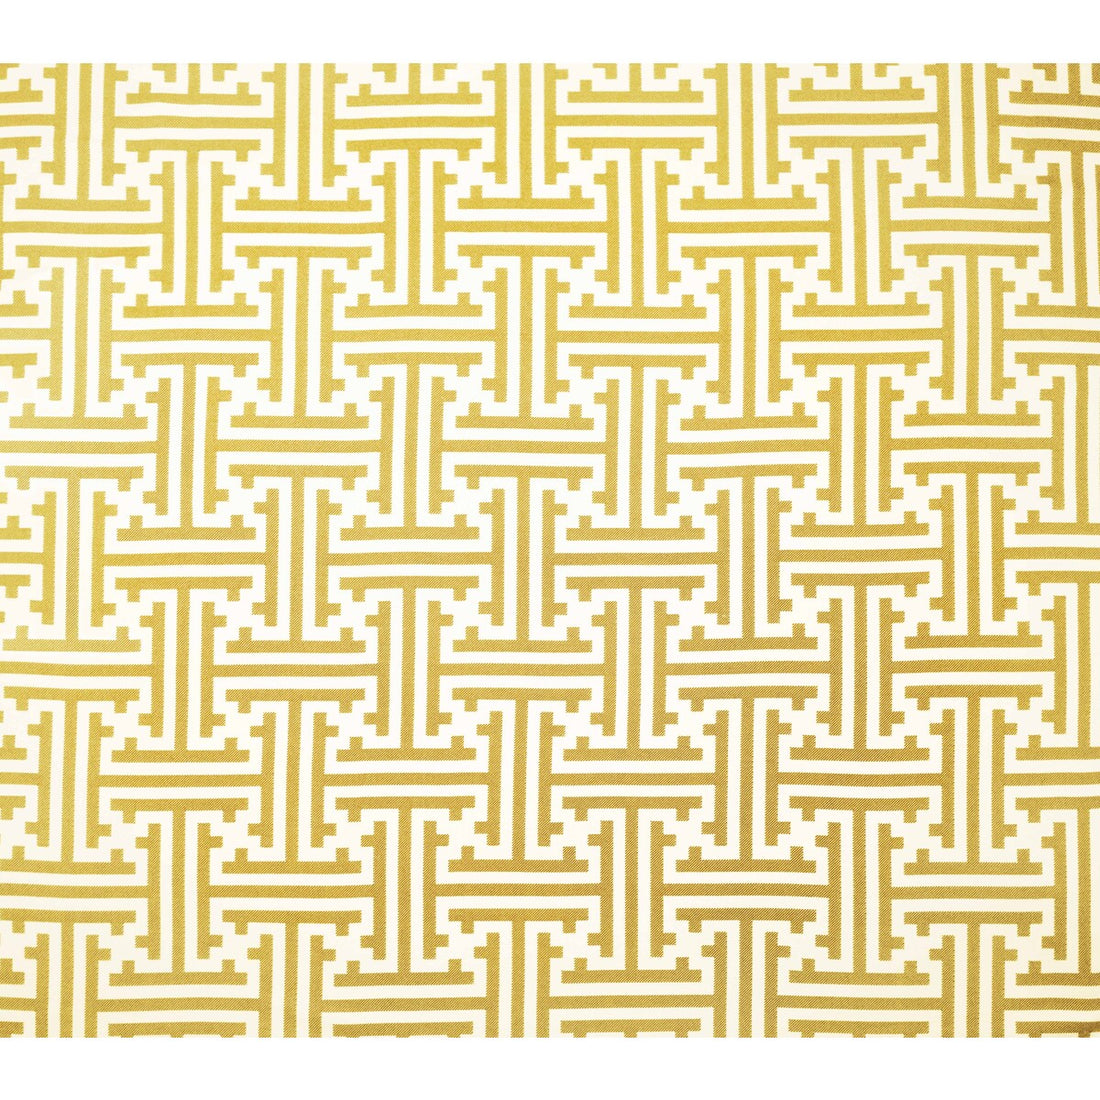 Clark fabric in amarillo color - pattern GDT5380.6.0 - by Gaston y Daniela in the Gaston Africalia collection